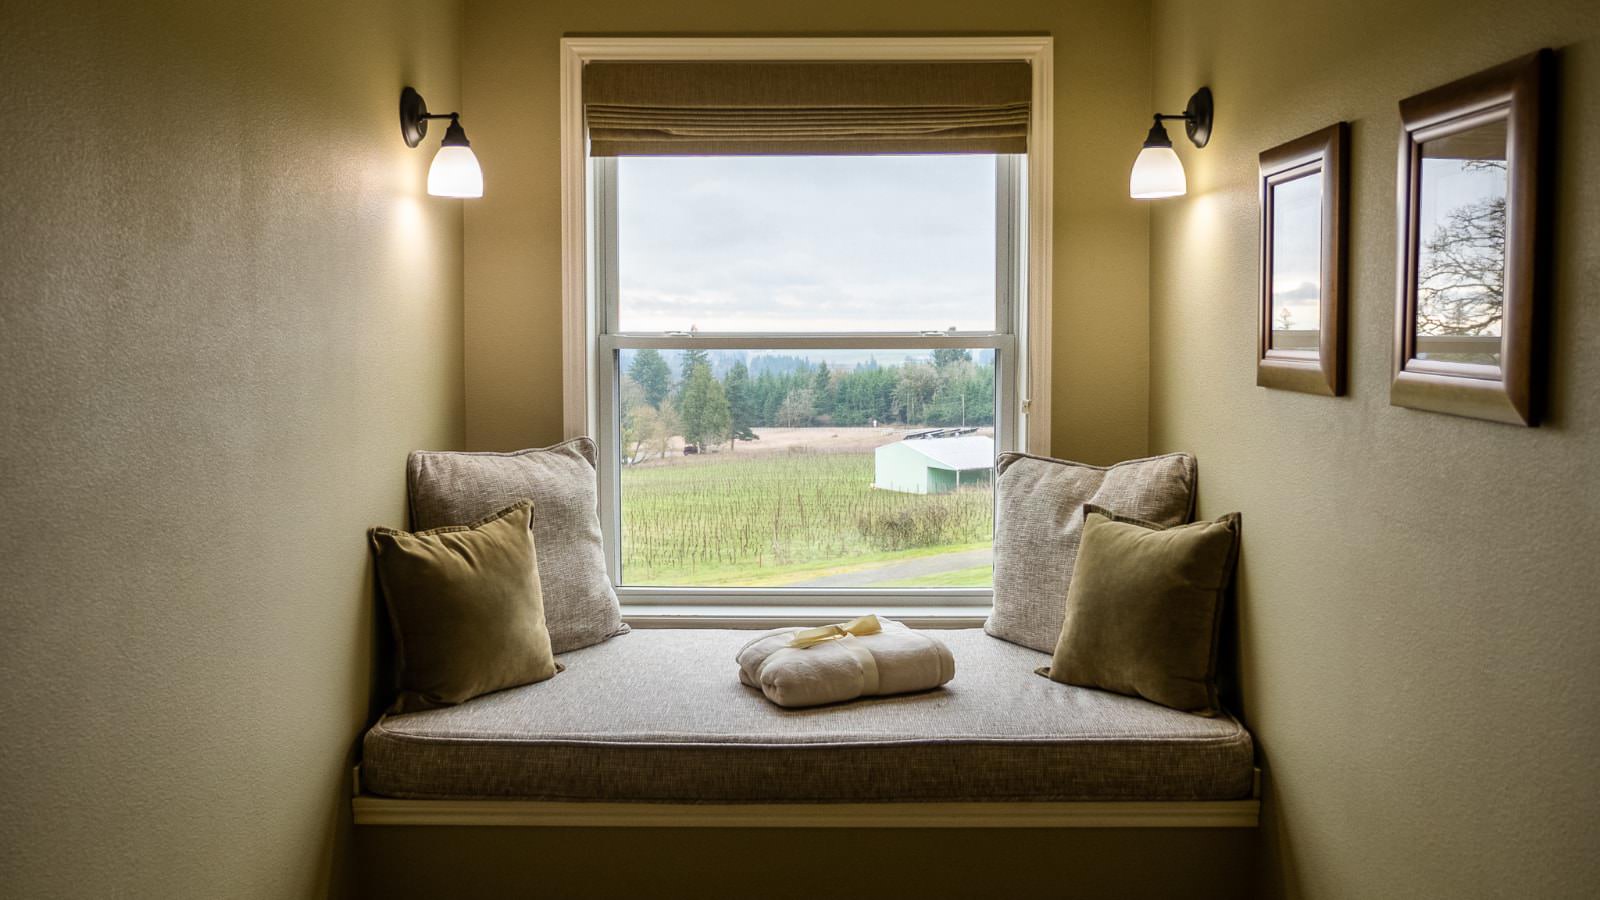 Nook with light tan walls, two wall sconces, tan cushion, tan and green pillows, and window with view of a vineyard